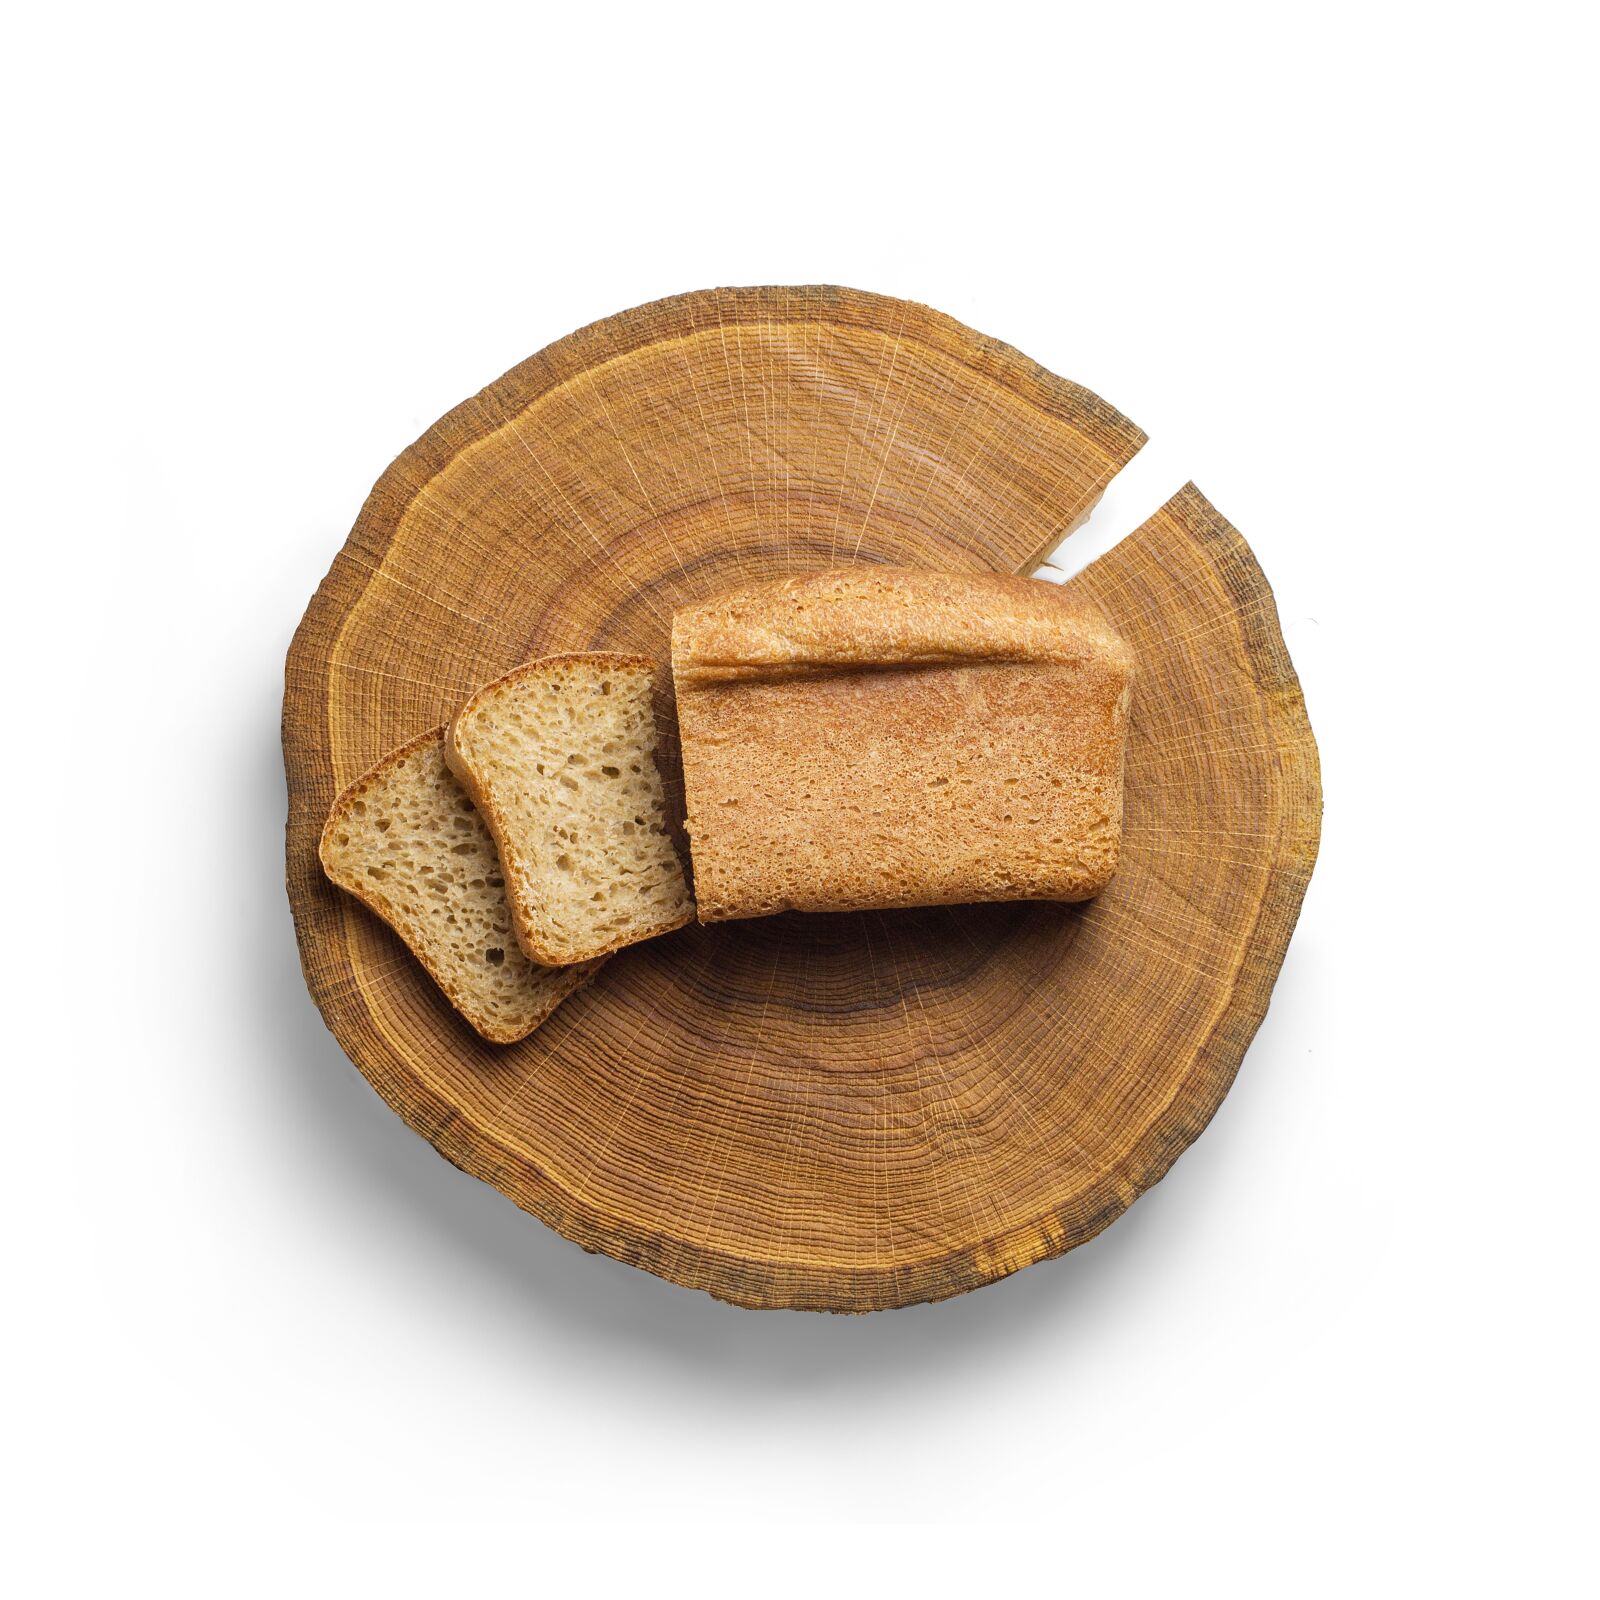 Canon EOS M3 sample photo. Rye bread, brown, wood photography